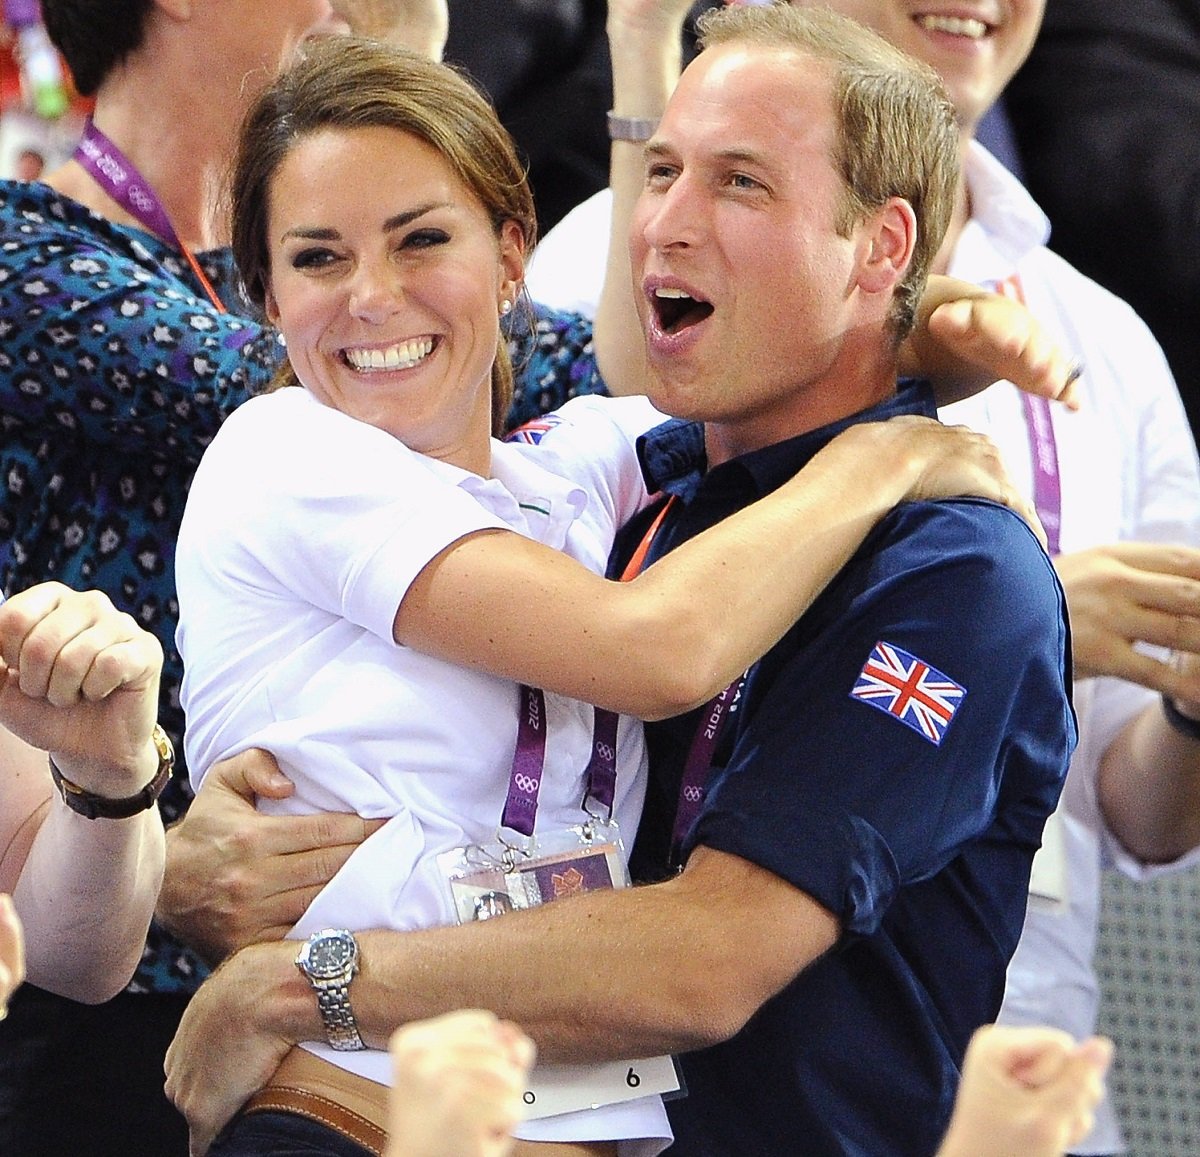 Kate Middleton and Prince William hugging each other and cheering during Day 6 of the London Olympic Games